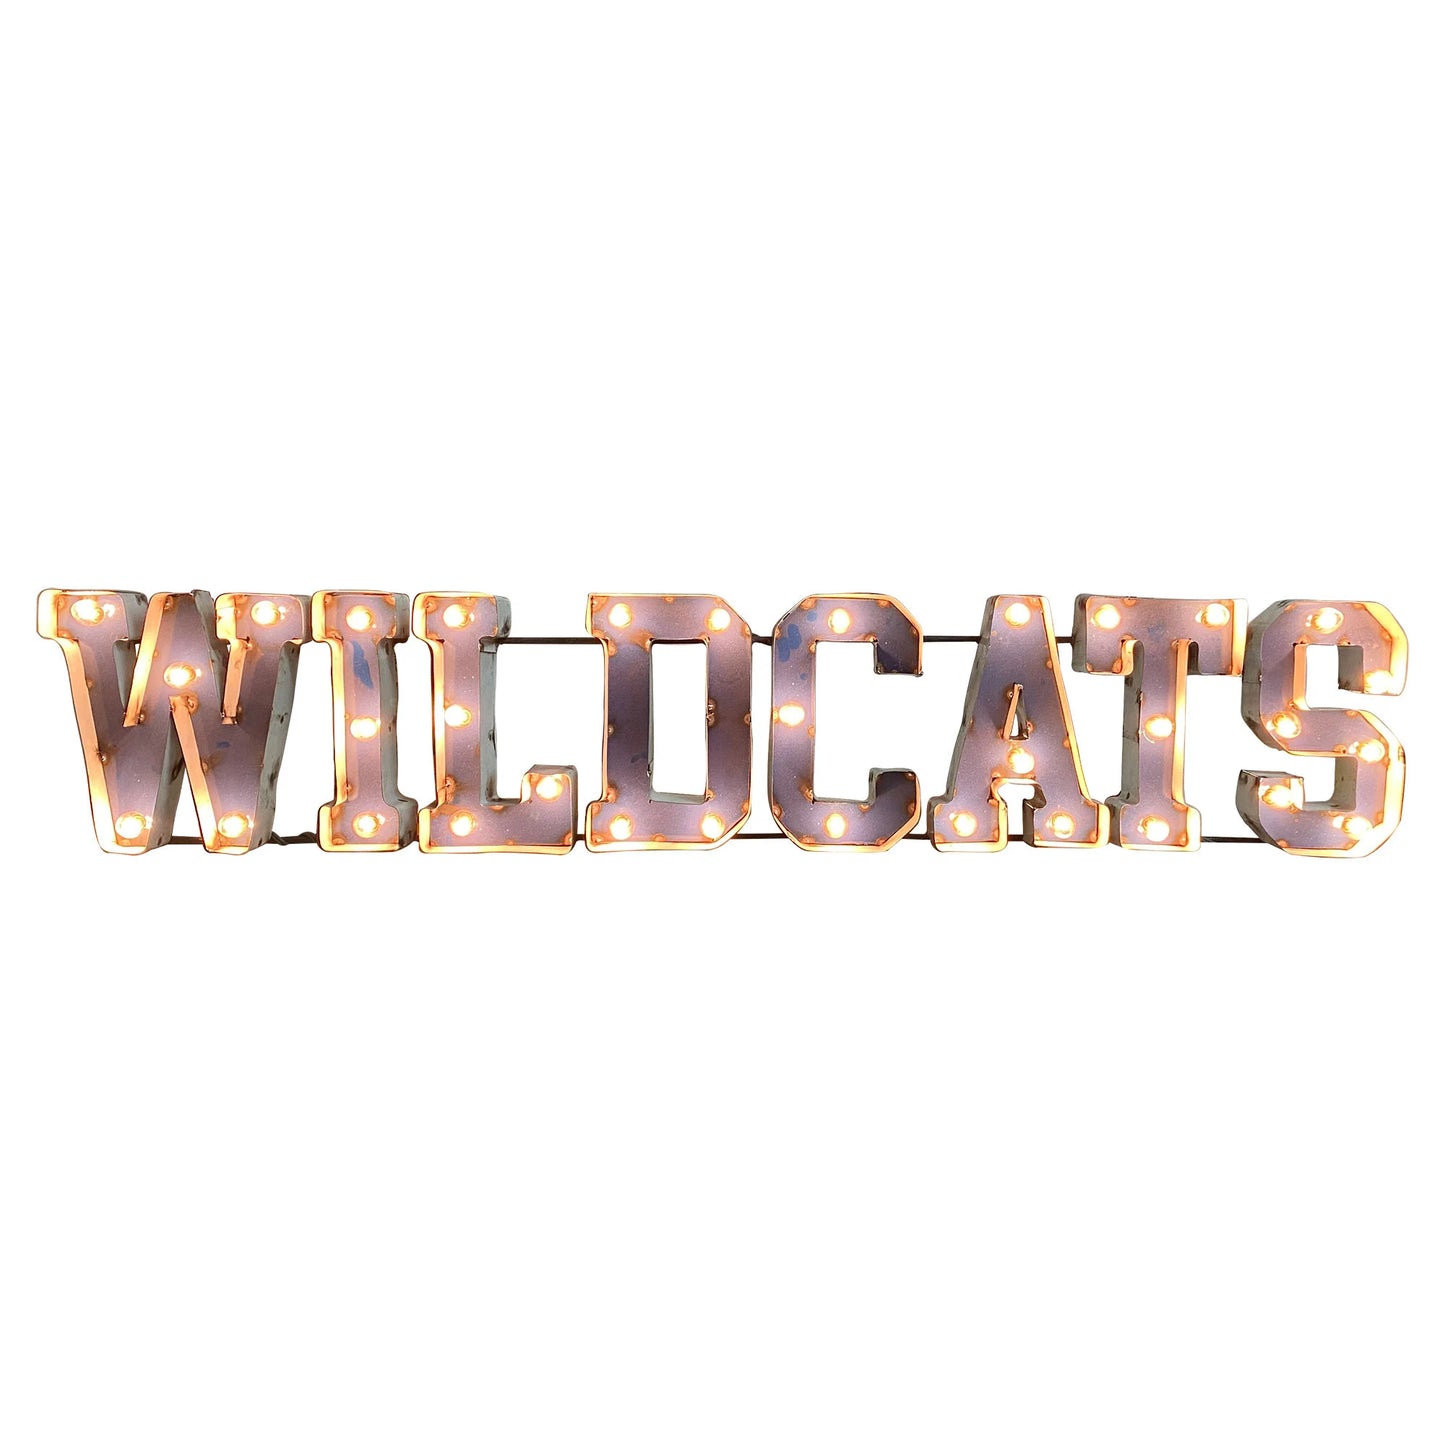 University of Kentucky "Wildcats" Lighted Recycled Metal Wall Decor